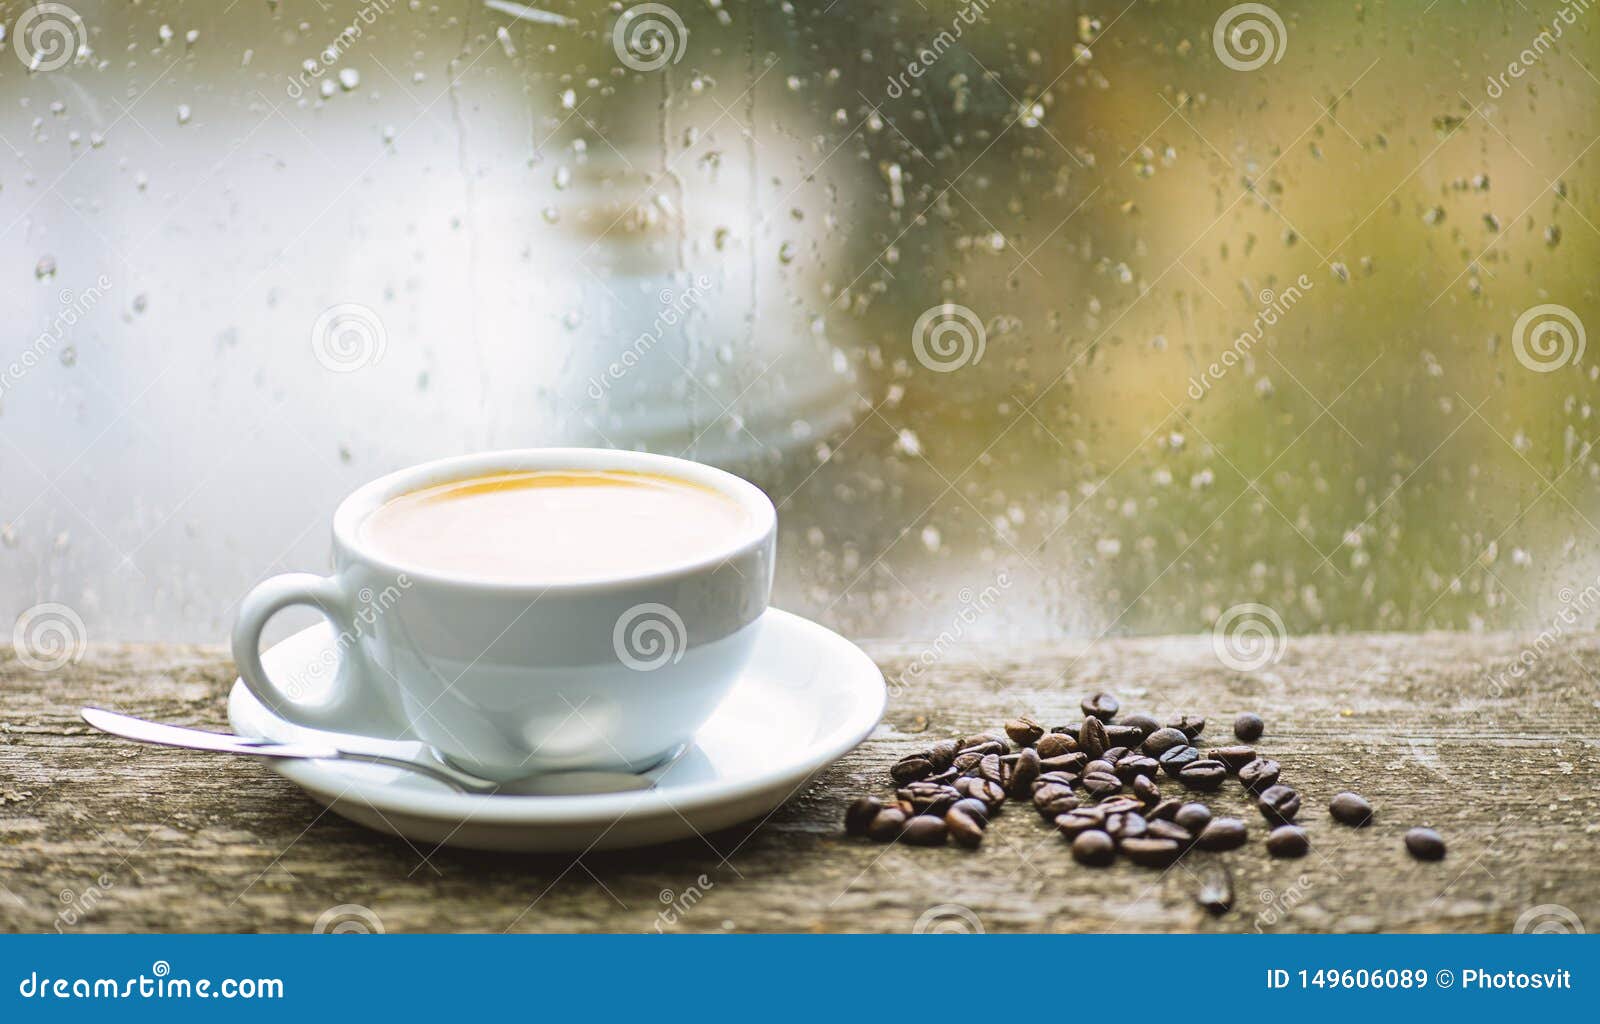 Autumn Cloudy Weather Better With Caffeine Drink. Enjoying Coffee On Rainy Day. Fresh Brewed ...